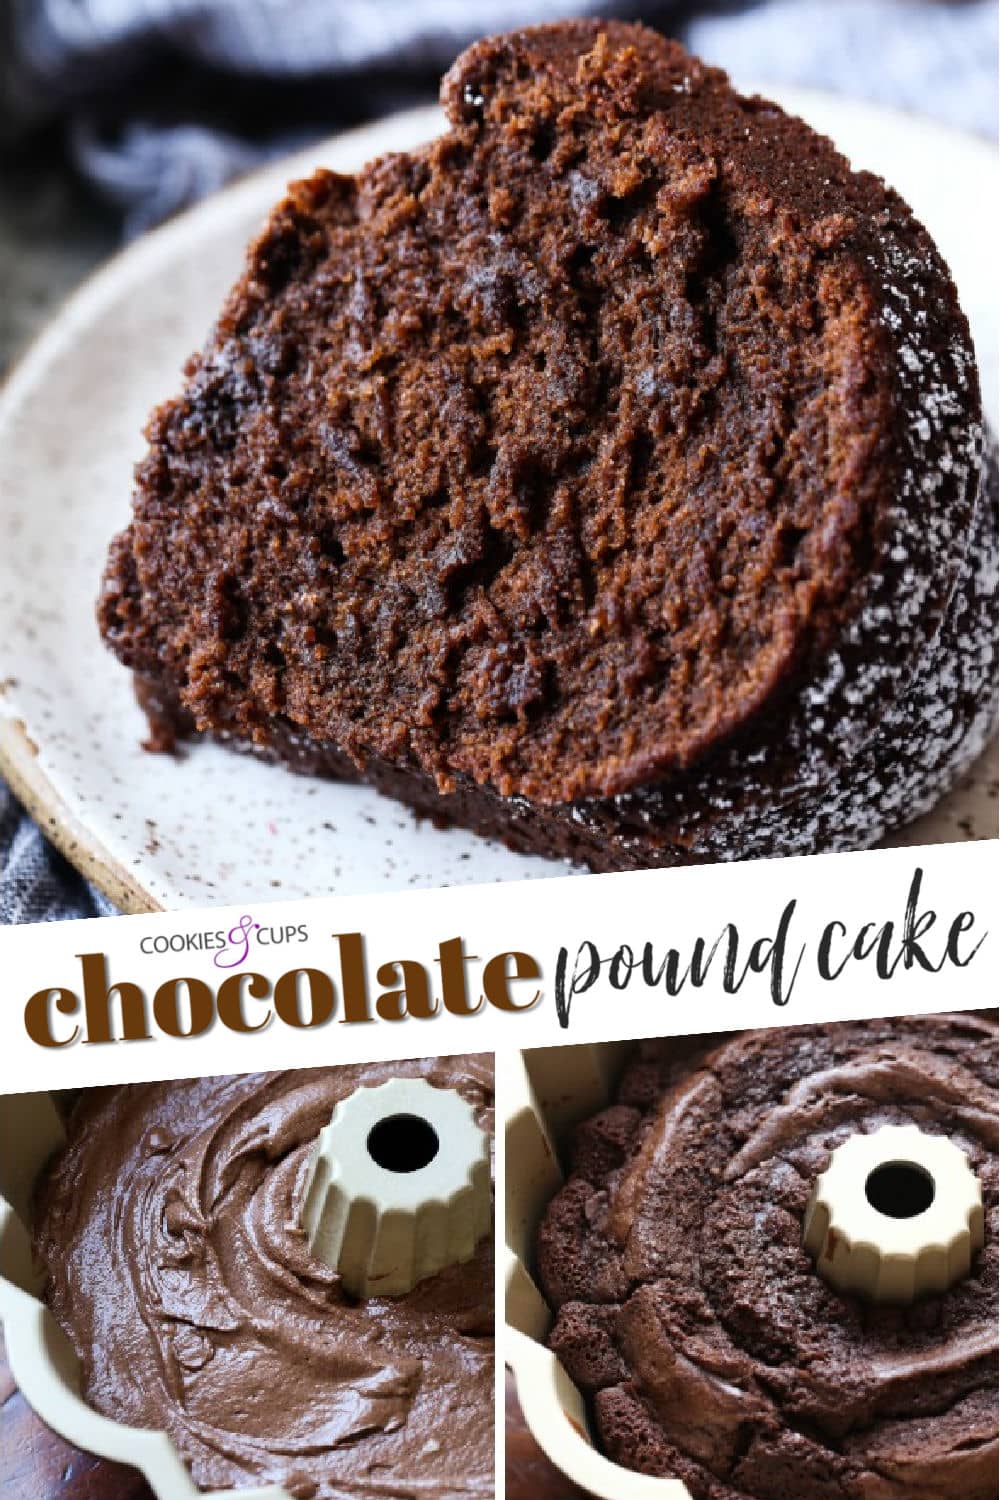 Super Moist Chocolate Pound Cake | Cookies and Cups